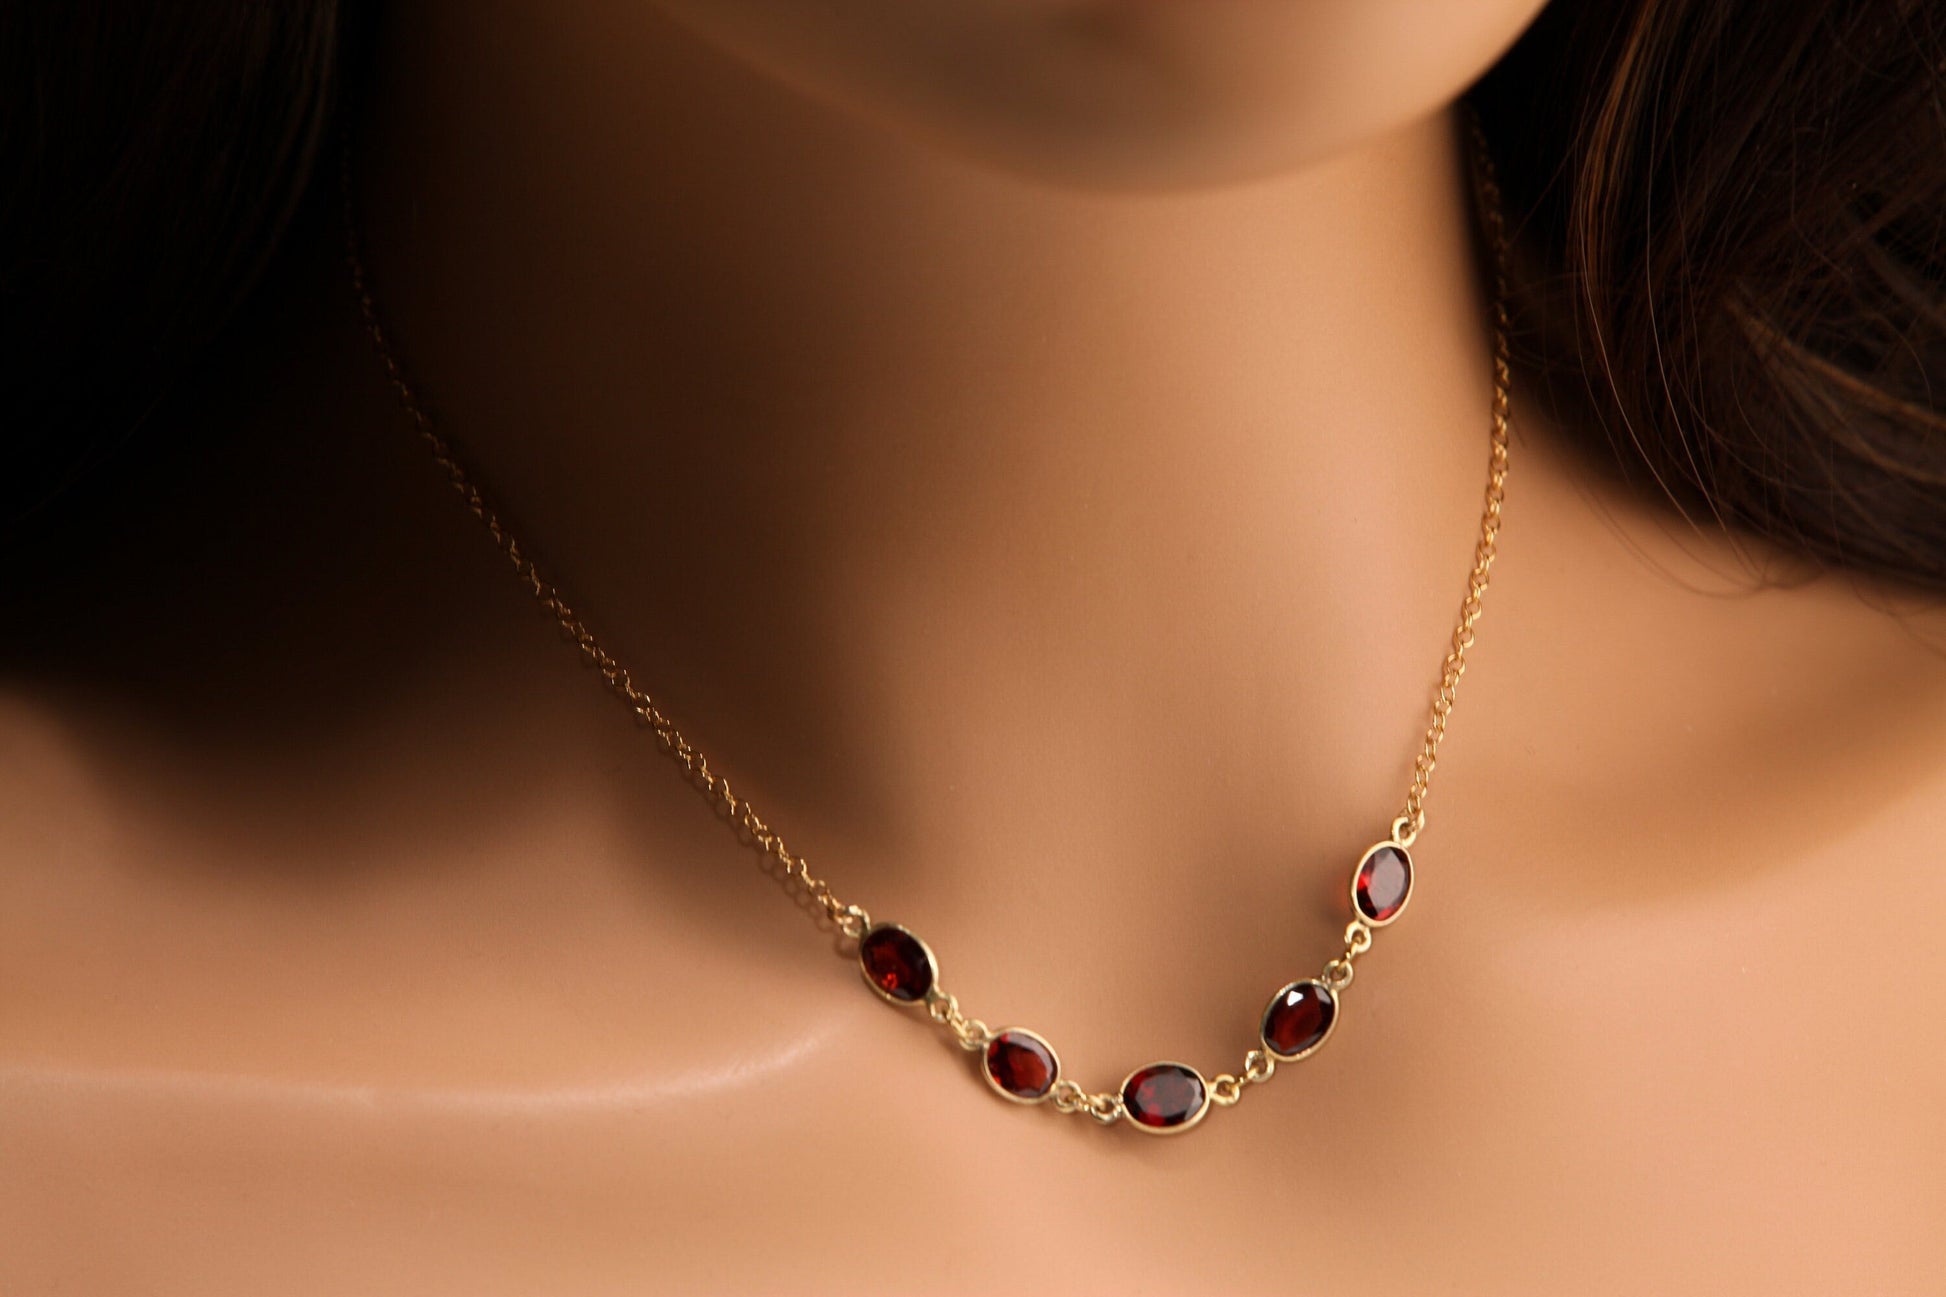 Genuine Garnet Faceted Merlot Red 6x10mm Oval Bezel 14K Gold Filled Cable Chain Necklace, Bridal, January Birthstone, Valentine Gift